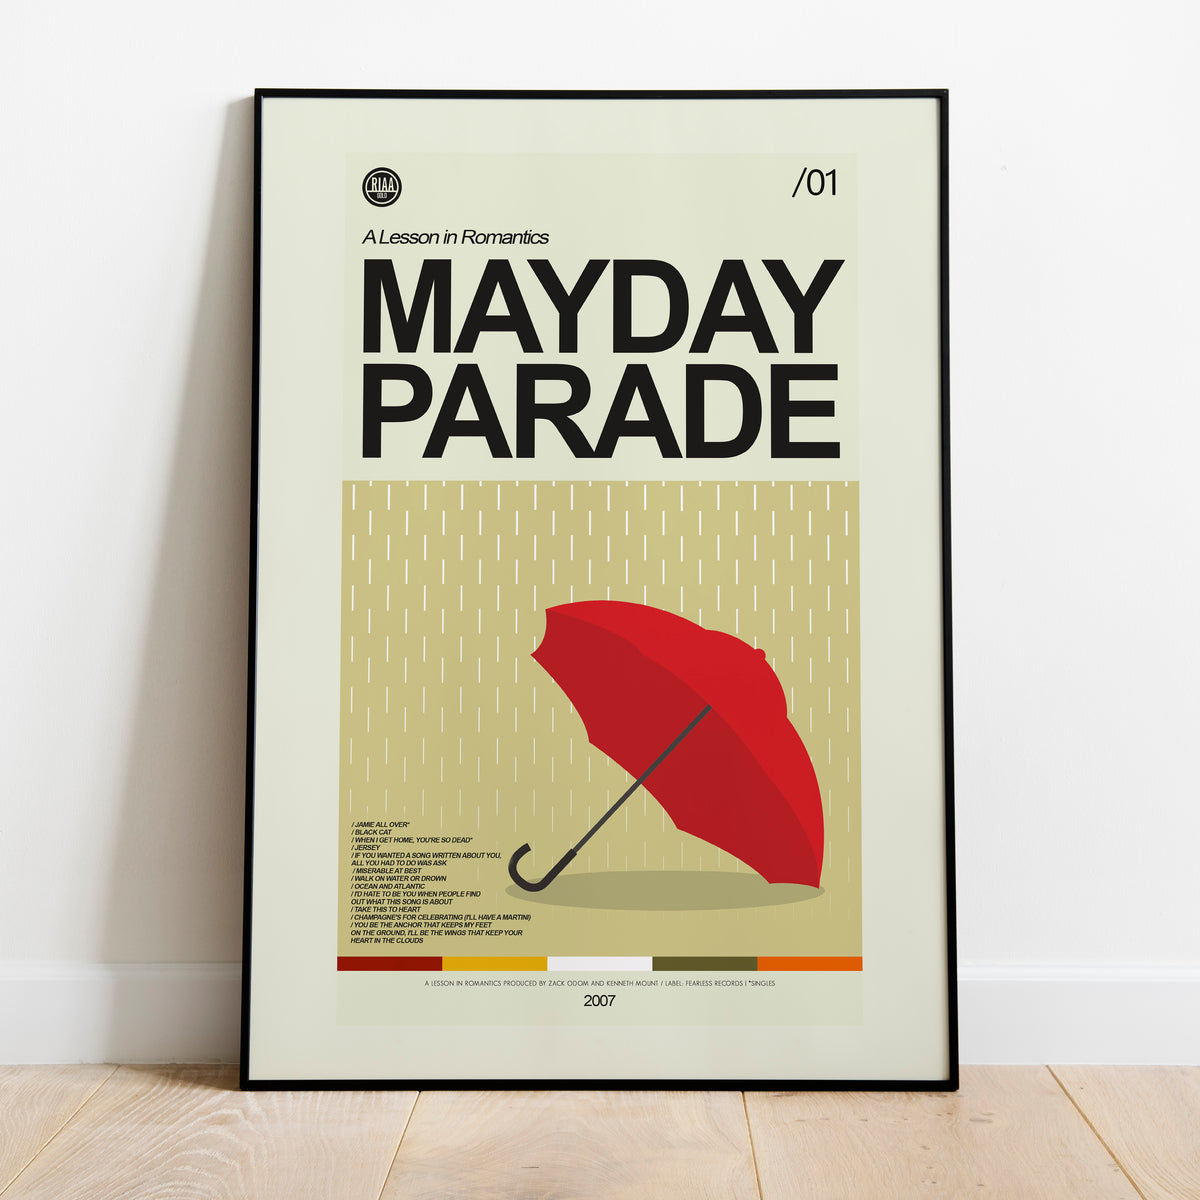 Mayday Parade - A Lesson in Romantics (Album) Inspired | 12"x18" or 18"x24" Print only